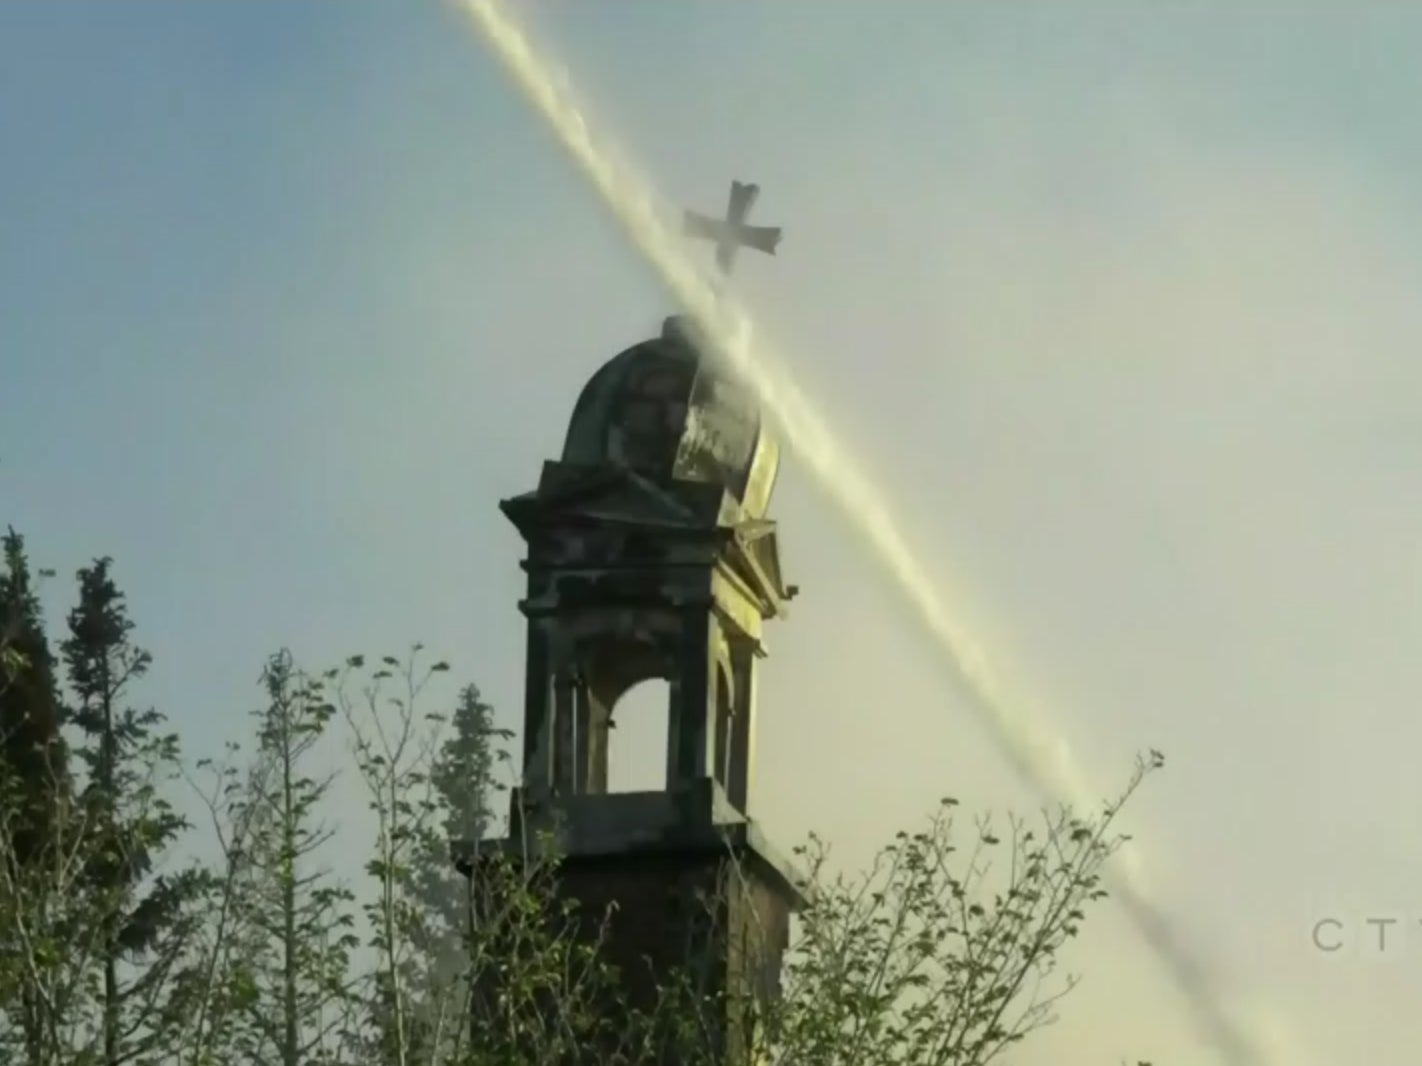 Firefighters put out a burning Catholic church in Calgary, Canada